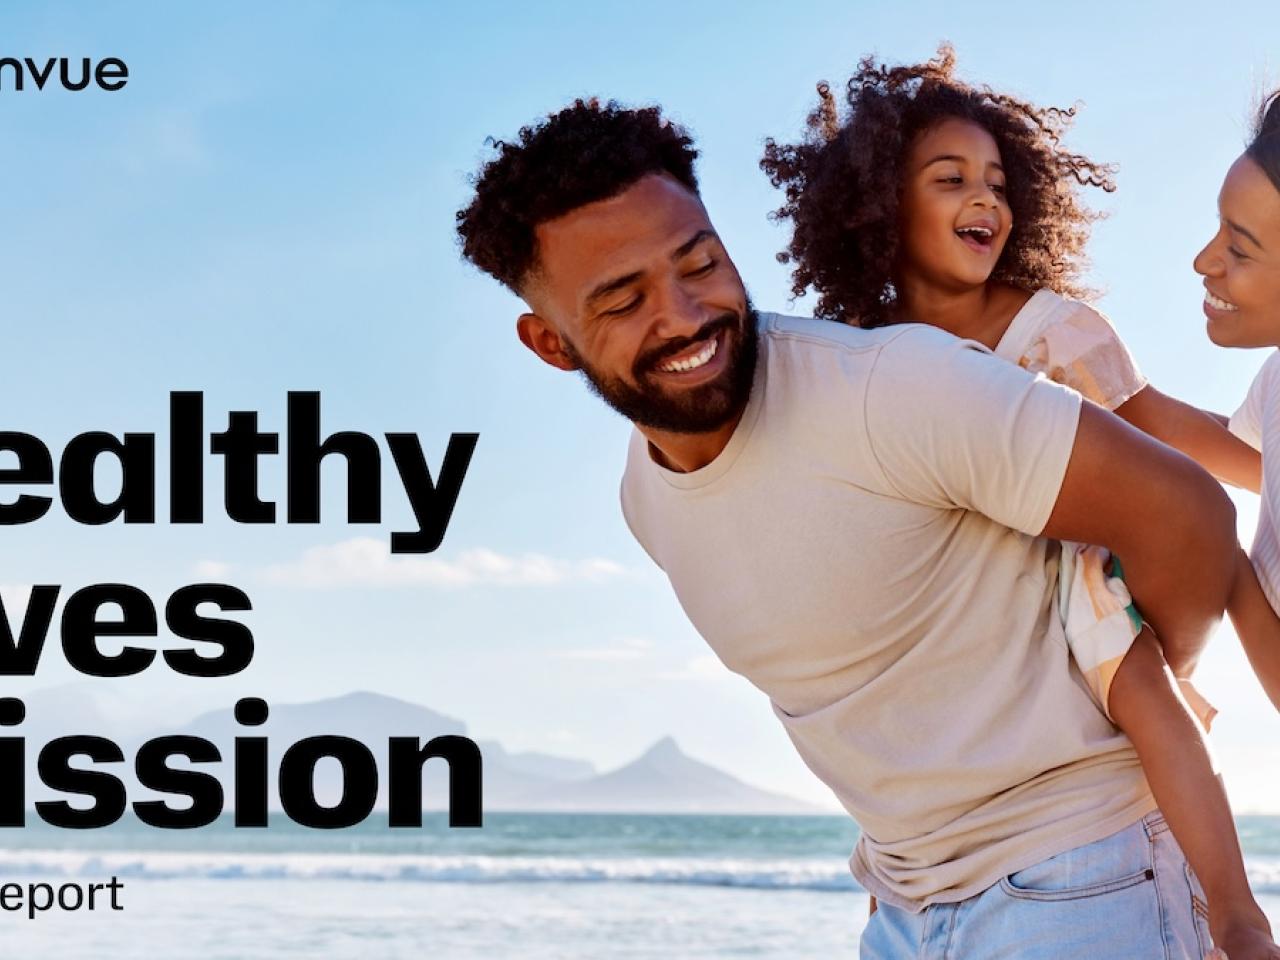 "Healthy Lives Mission" with image of happy people